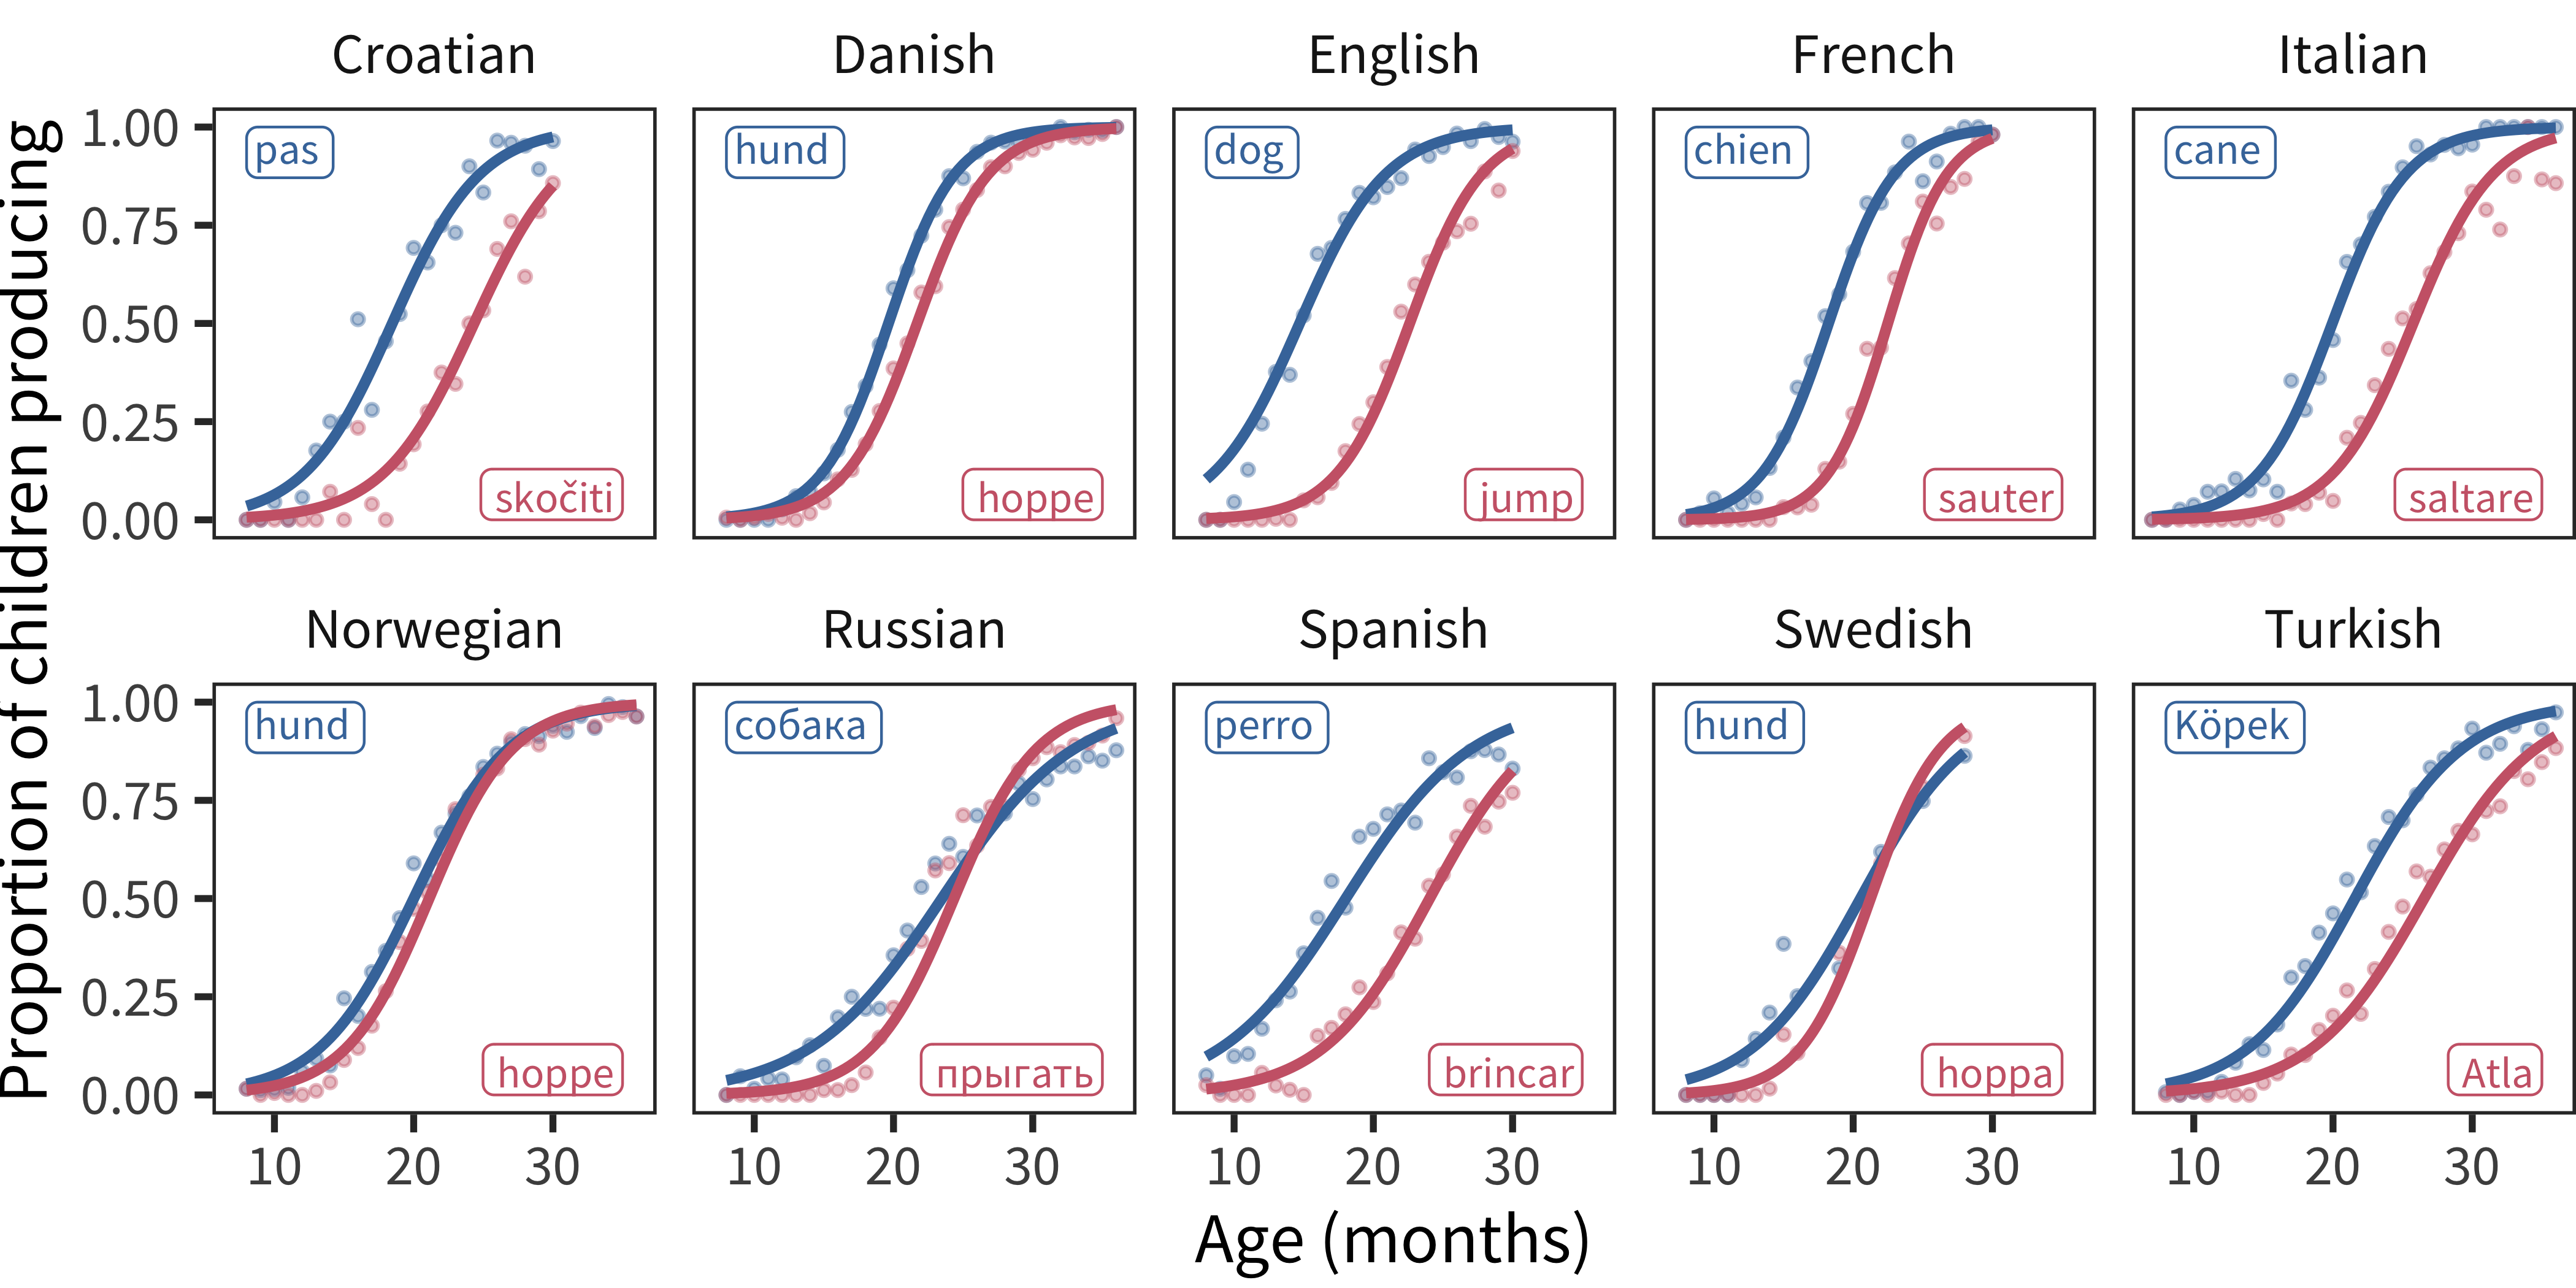 Example production trajectories for the words "dog" and "jump" across languages. Points show the proportion of children producing each word for each one-month age group. Lines show the best-fitting logistic curve. Labels show the forms of the words in each language.